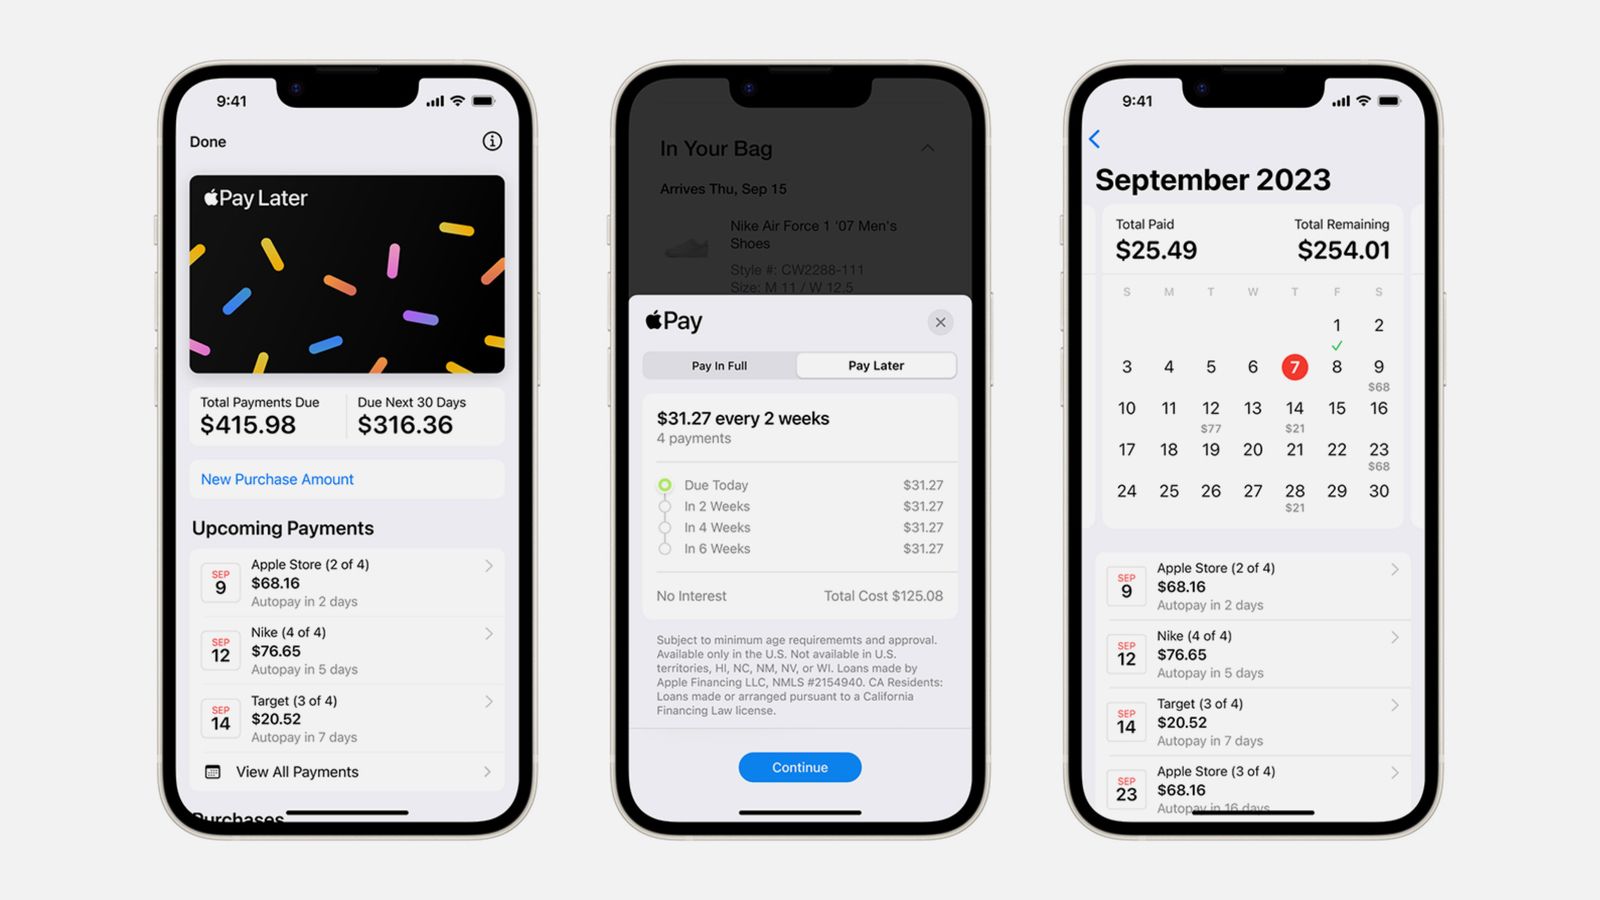 Afterpay Introduces Apple Pay For In-Store Payments - Retail Bum